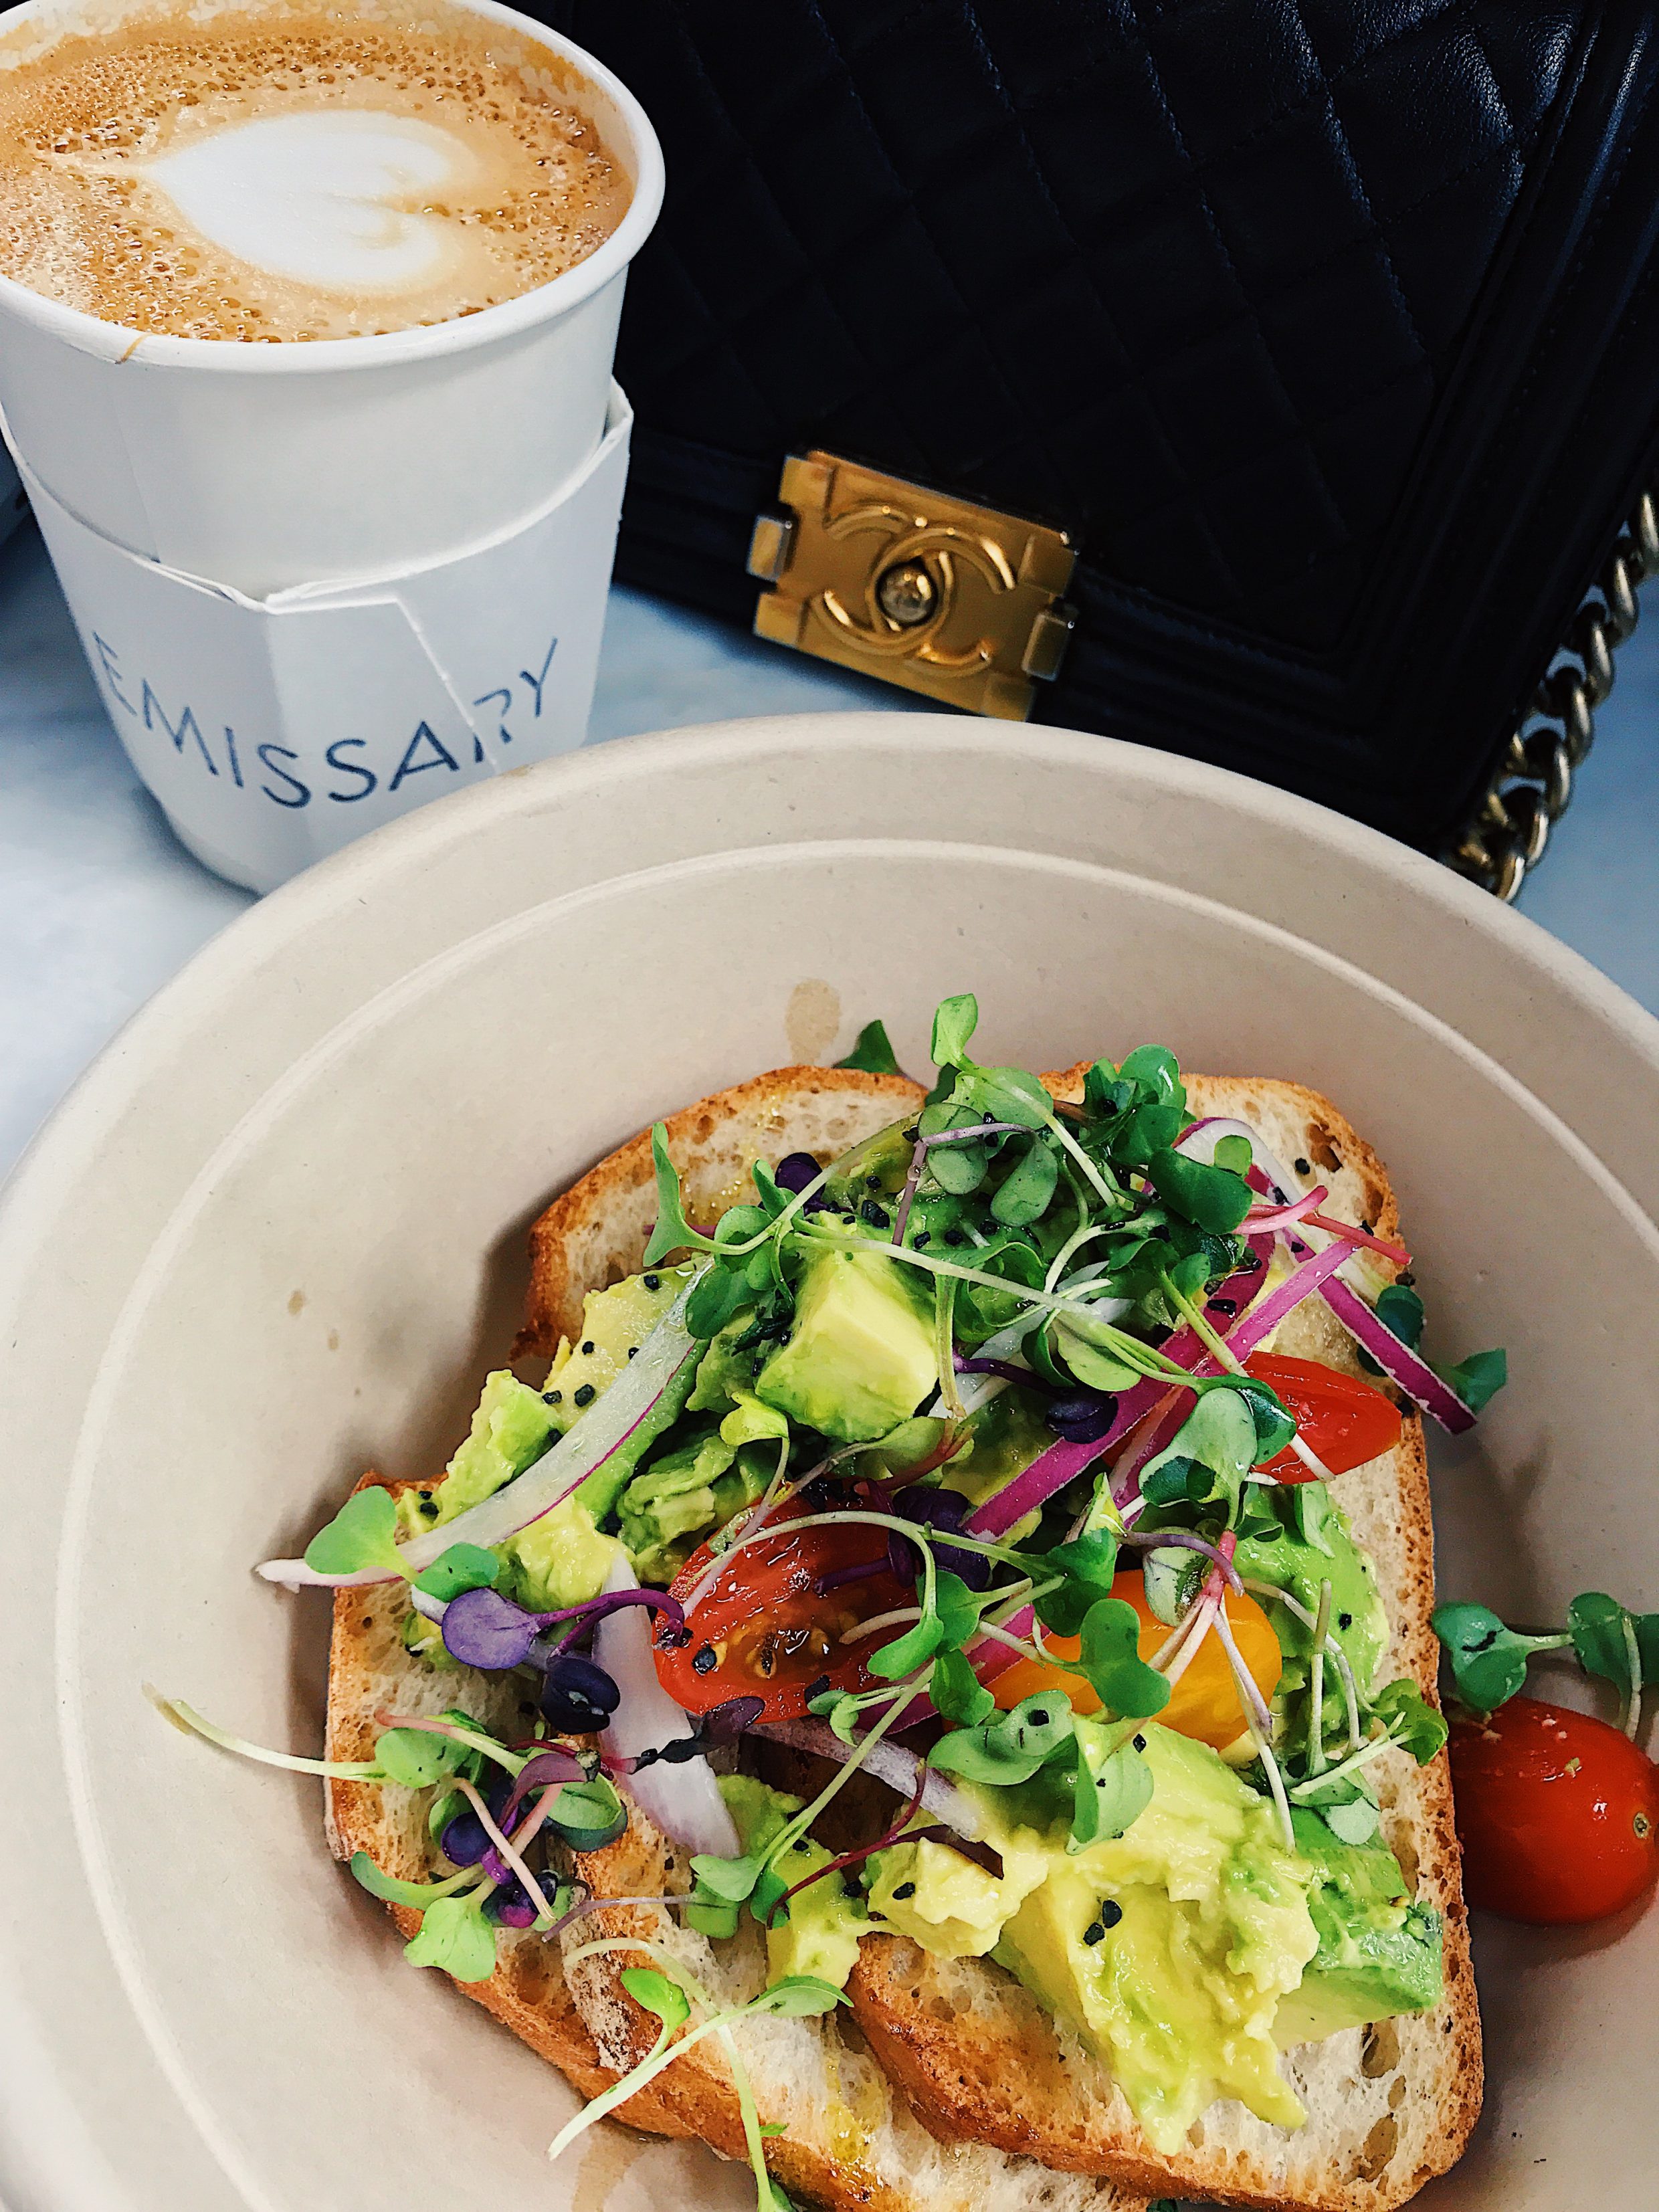 Emissary - Avocado Toast | A weekend in Washington, D.C. | Travel and Food Guide